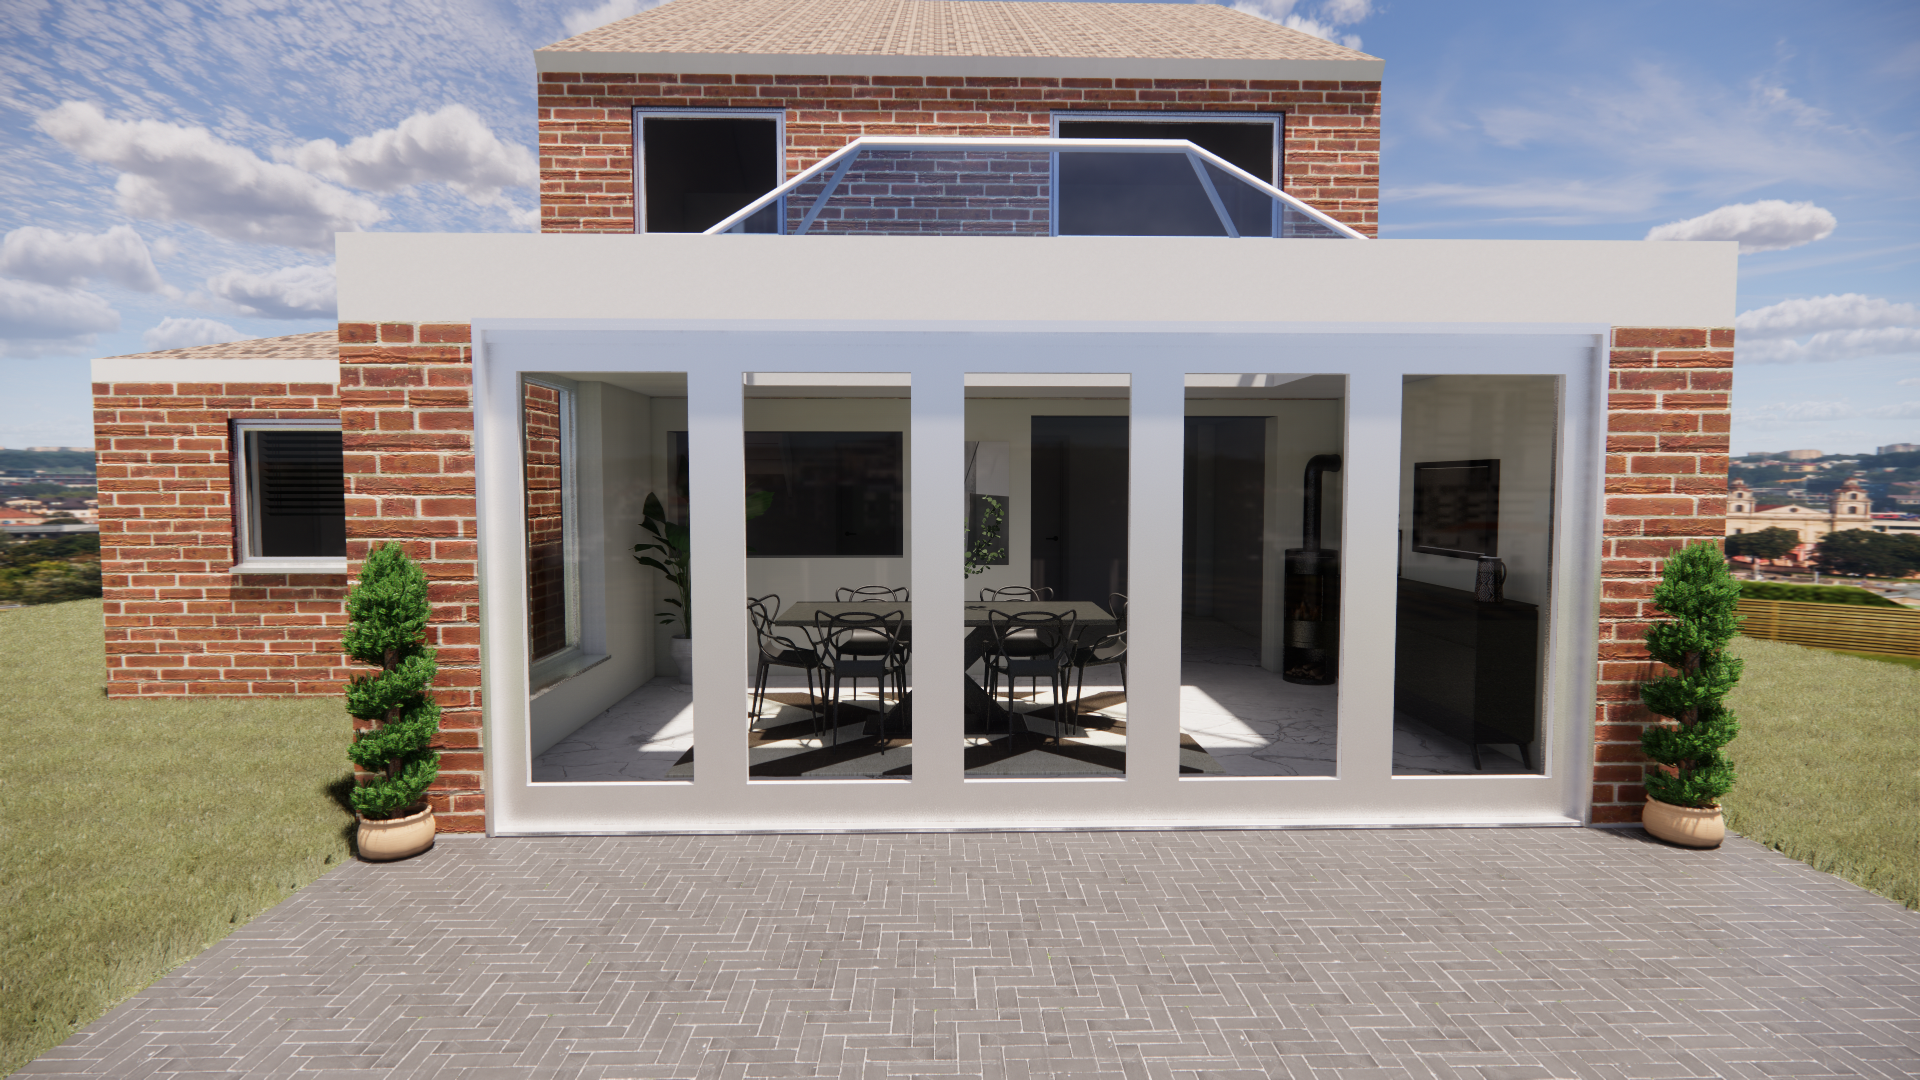 Melford Drive, Maidstone – Rear Extension